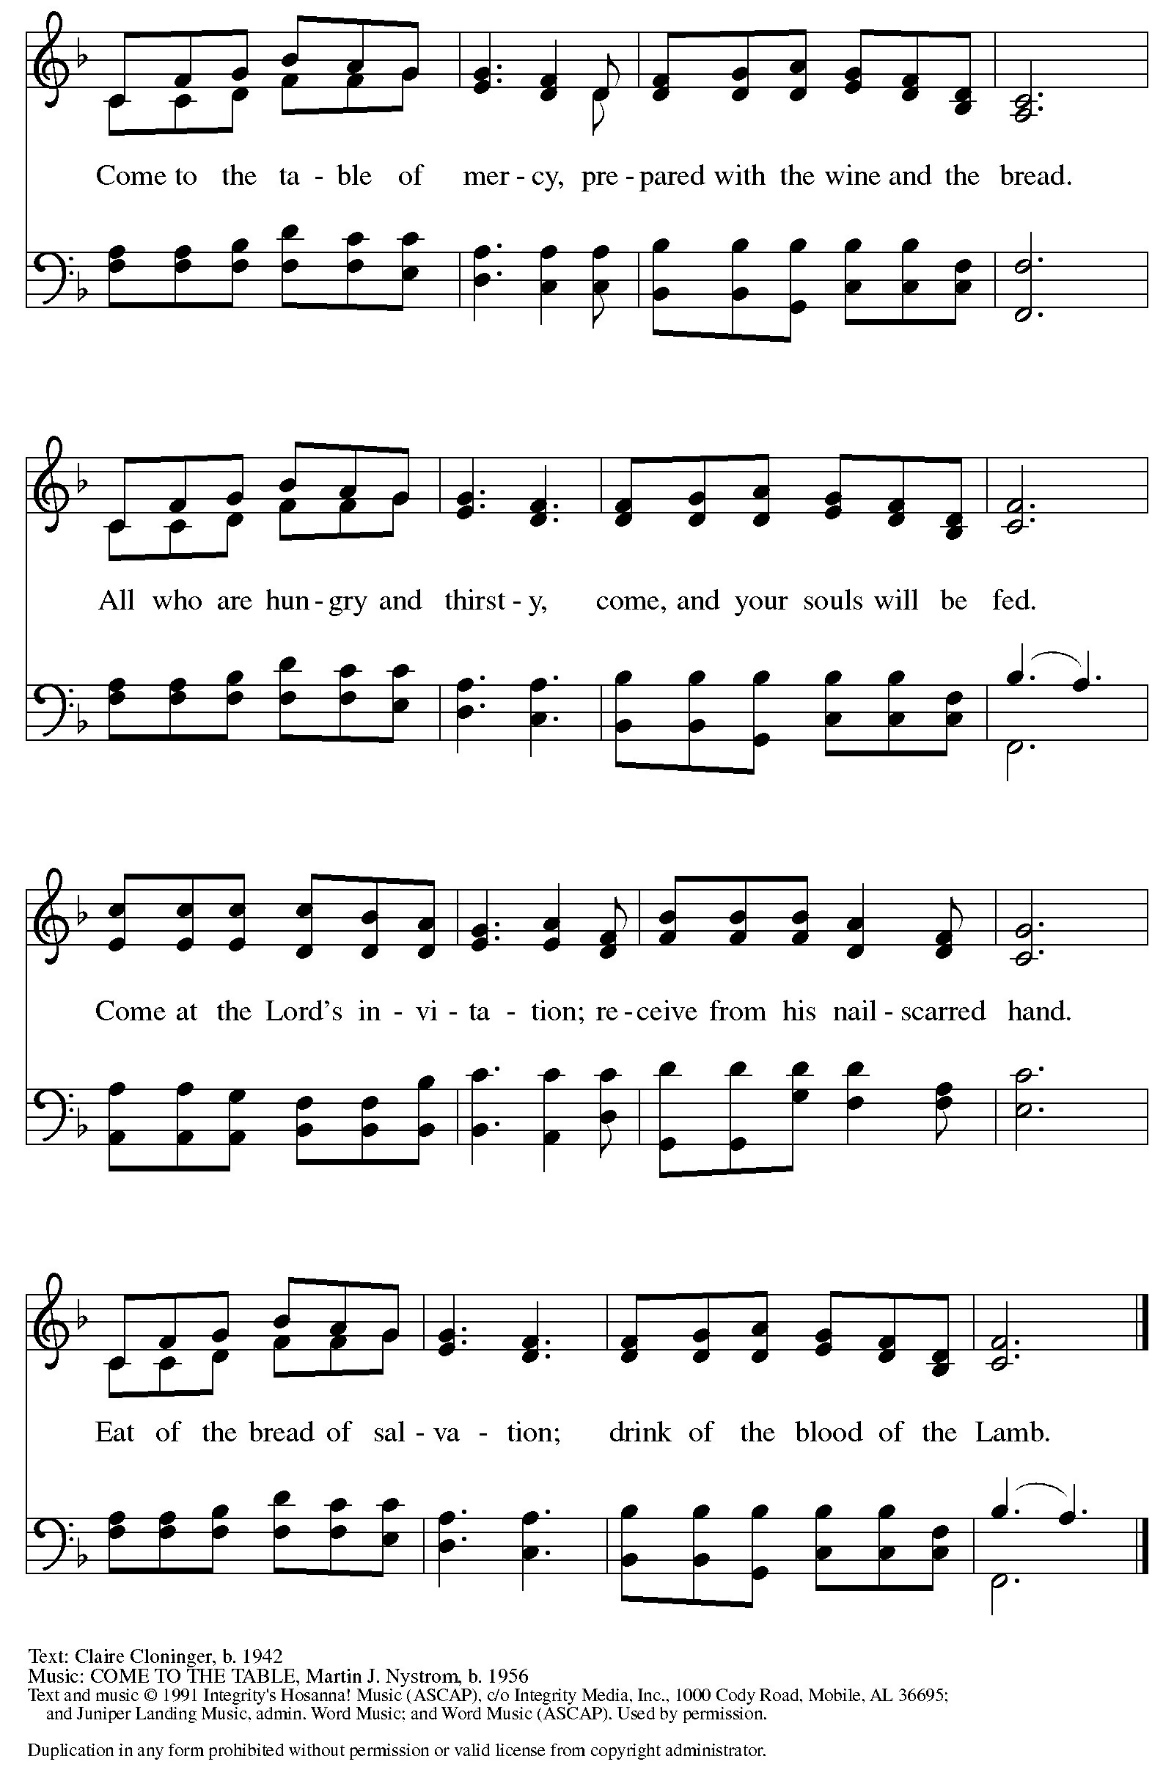 A sheet music with notes

Description automatically generated